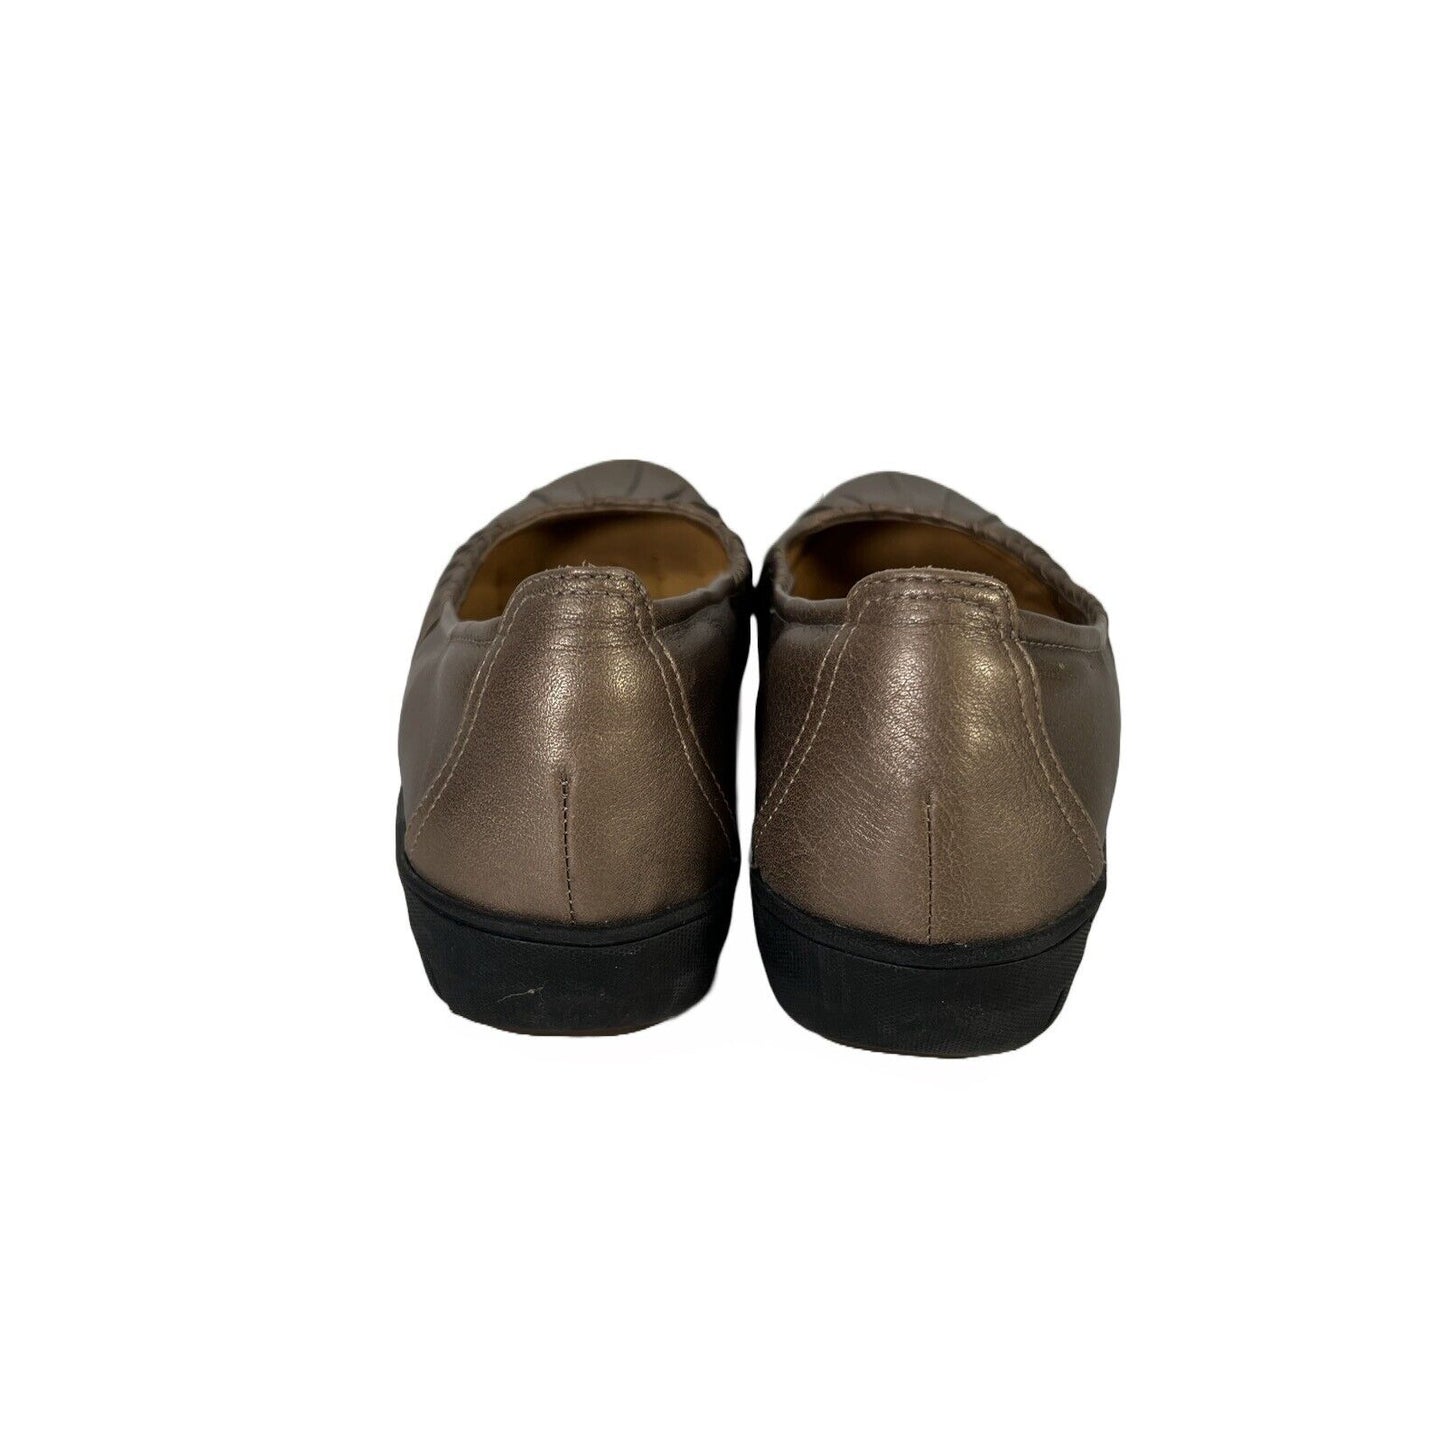 Clarks Unstructured Women's Brown/Bronze Leather Slip On Flats - 8